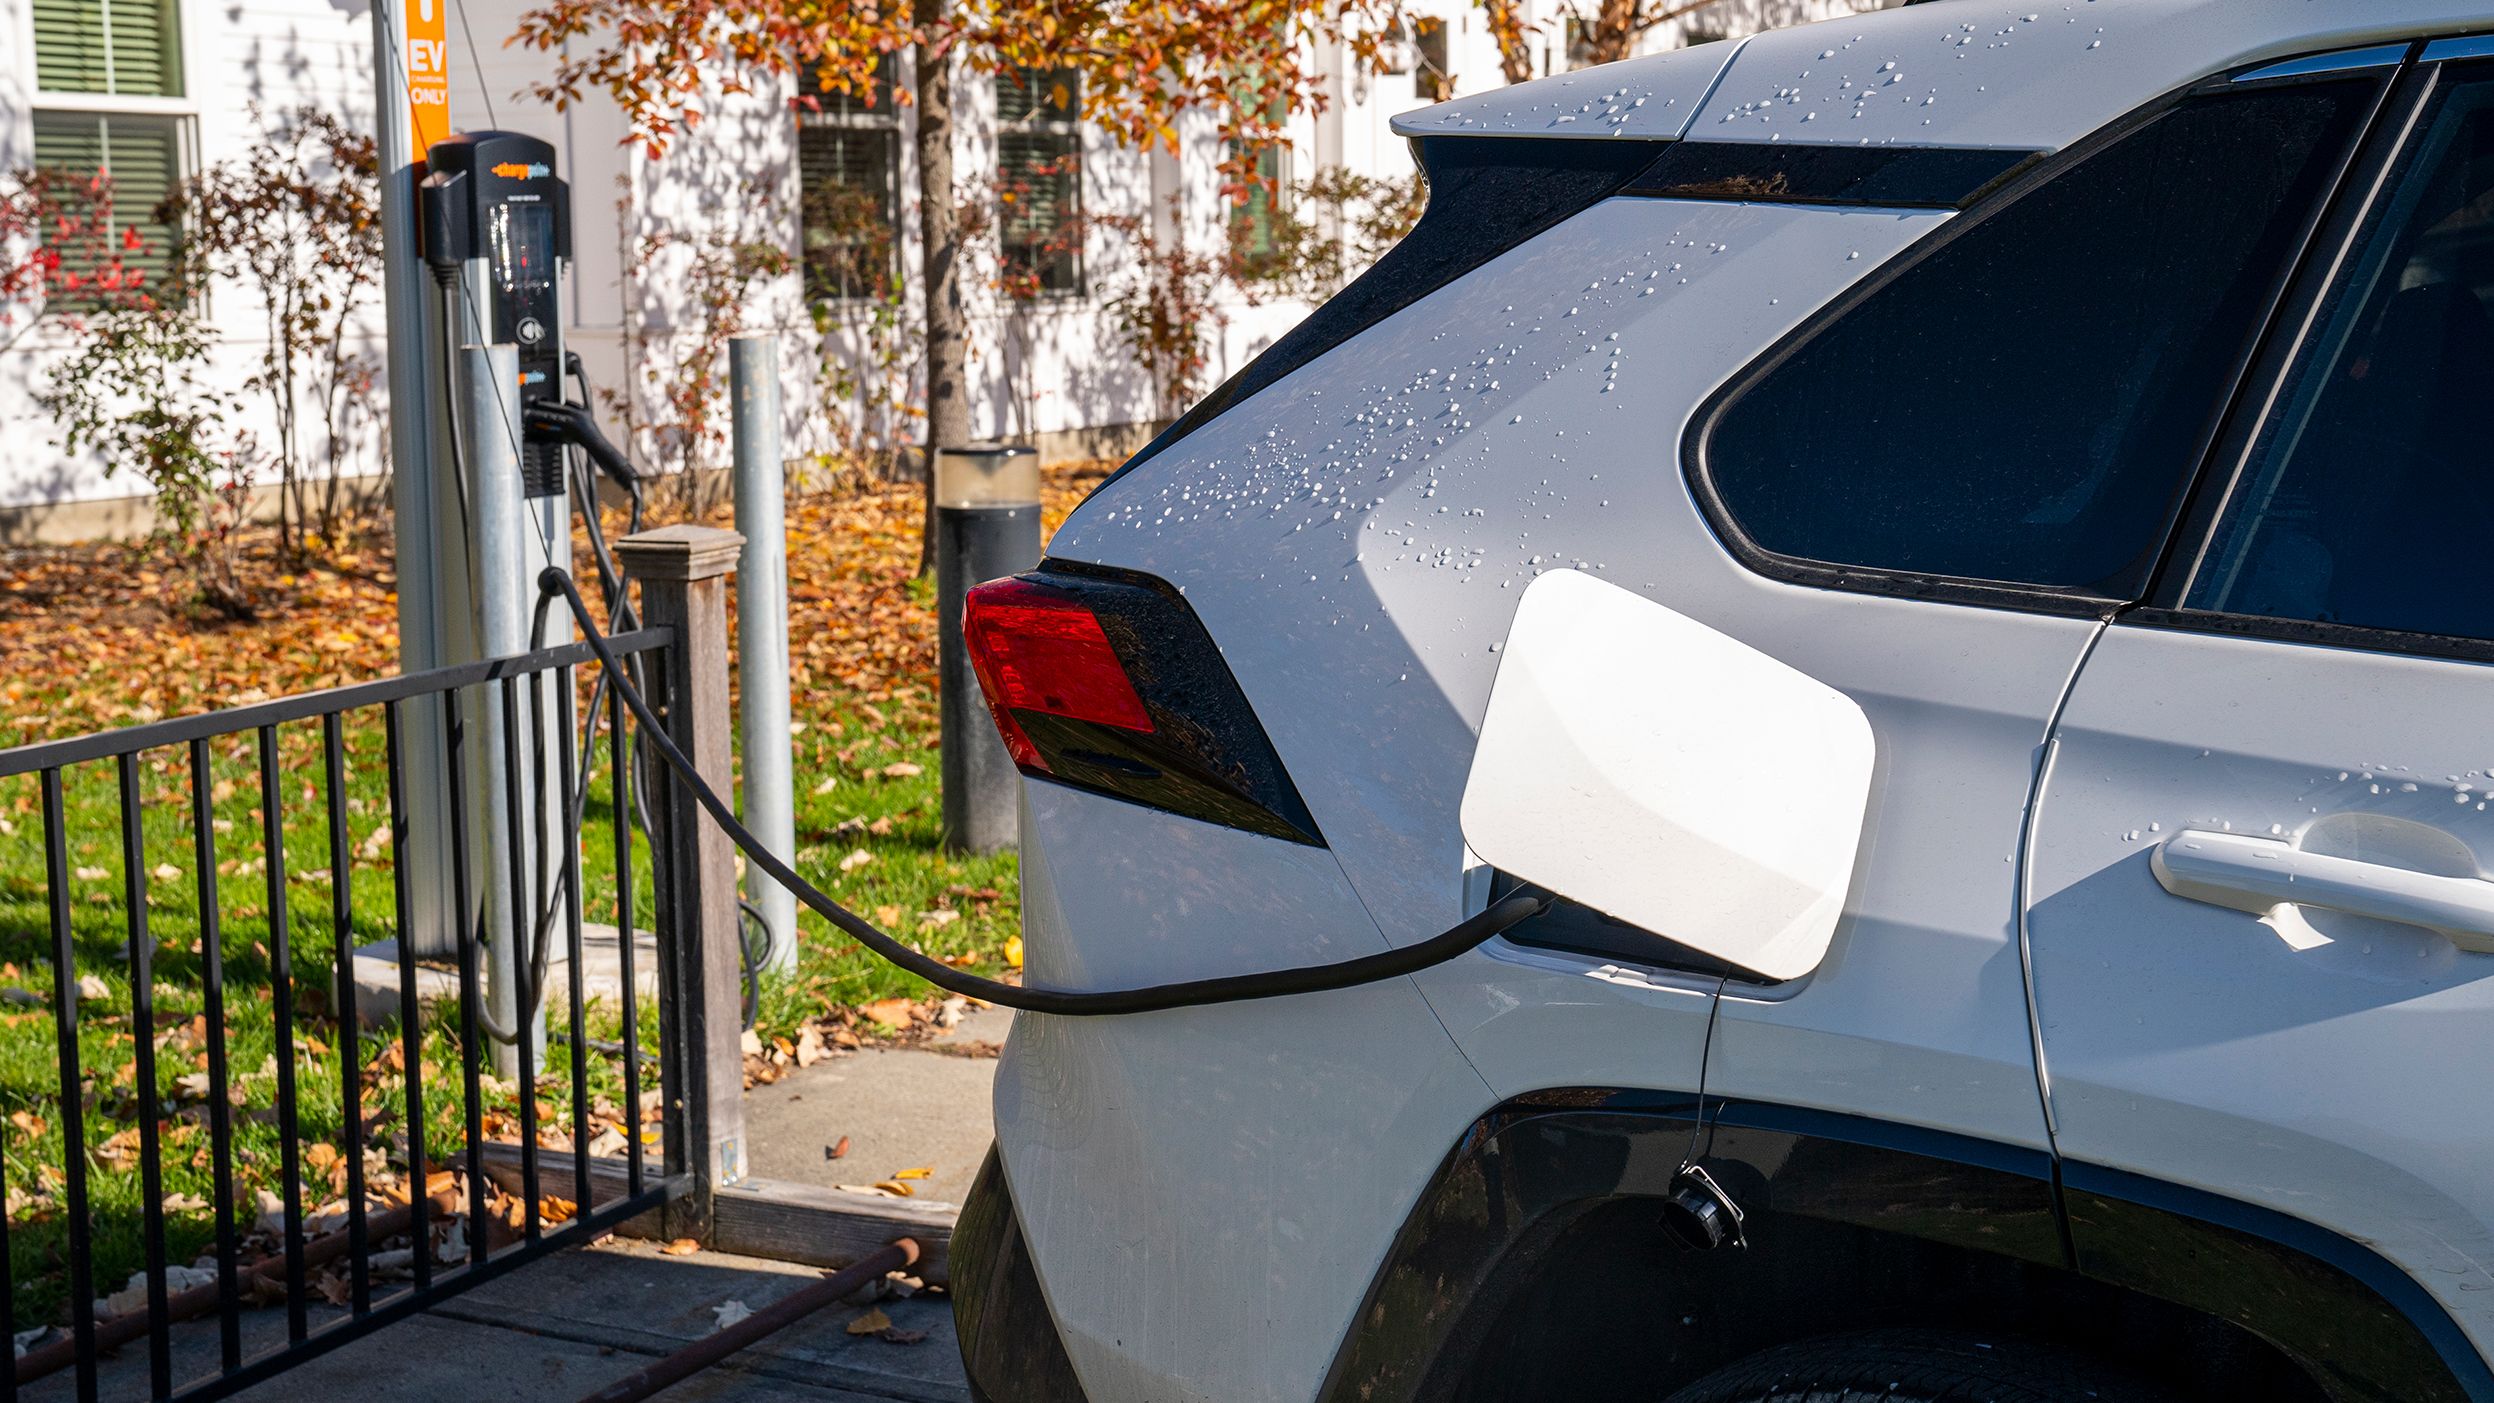 The Biden administration's goal is to increase the number of charging stations in the US to 500,000. Currently, there are only around 45,000 publicly available charging stations, according to the Department of Energy.